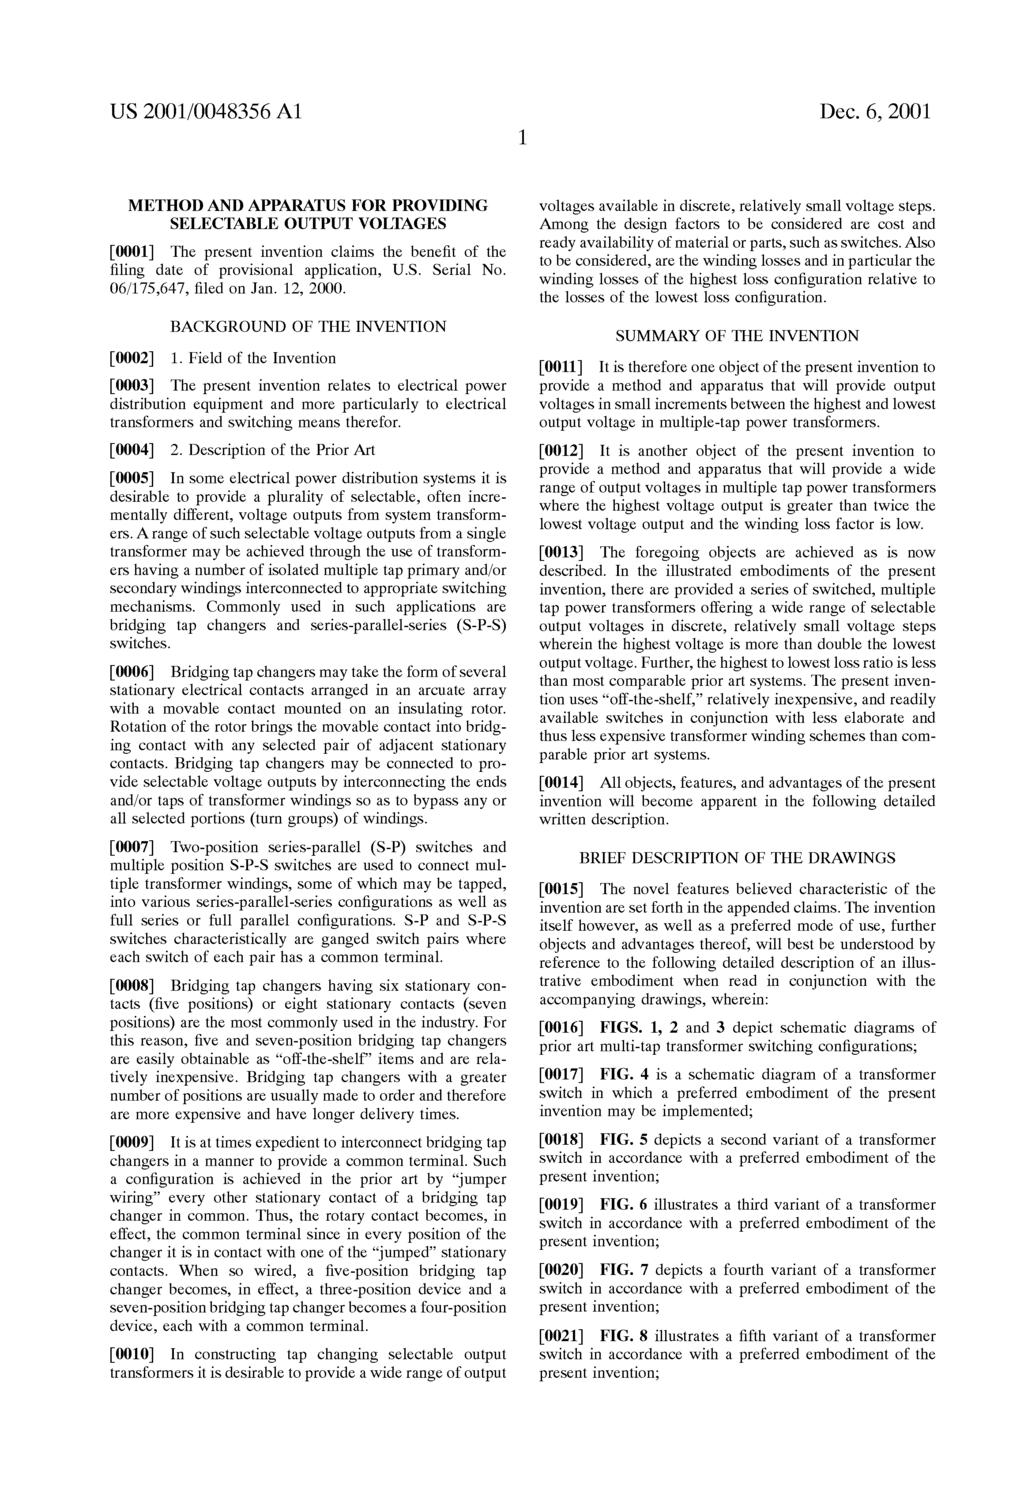 US 2001/0048356 A1 Dec. 6, 2001 METHOD AND APPARATUS FOR PROVIDING SELECTABLE OUTPUT VOLTAGES 0001. The present invention claims the benefit of the filing date of provisional application, U.S. Serial No.